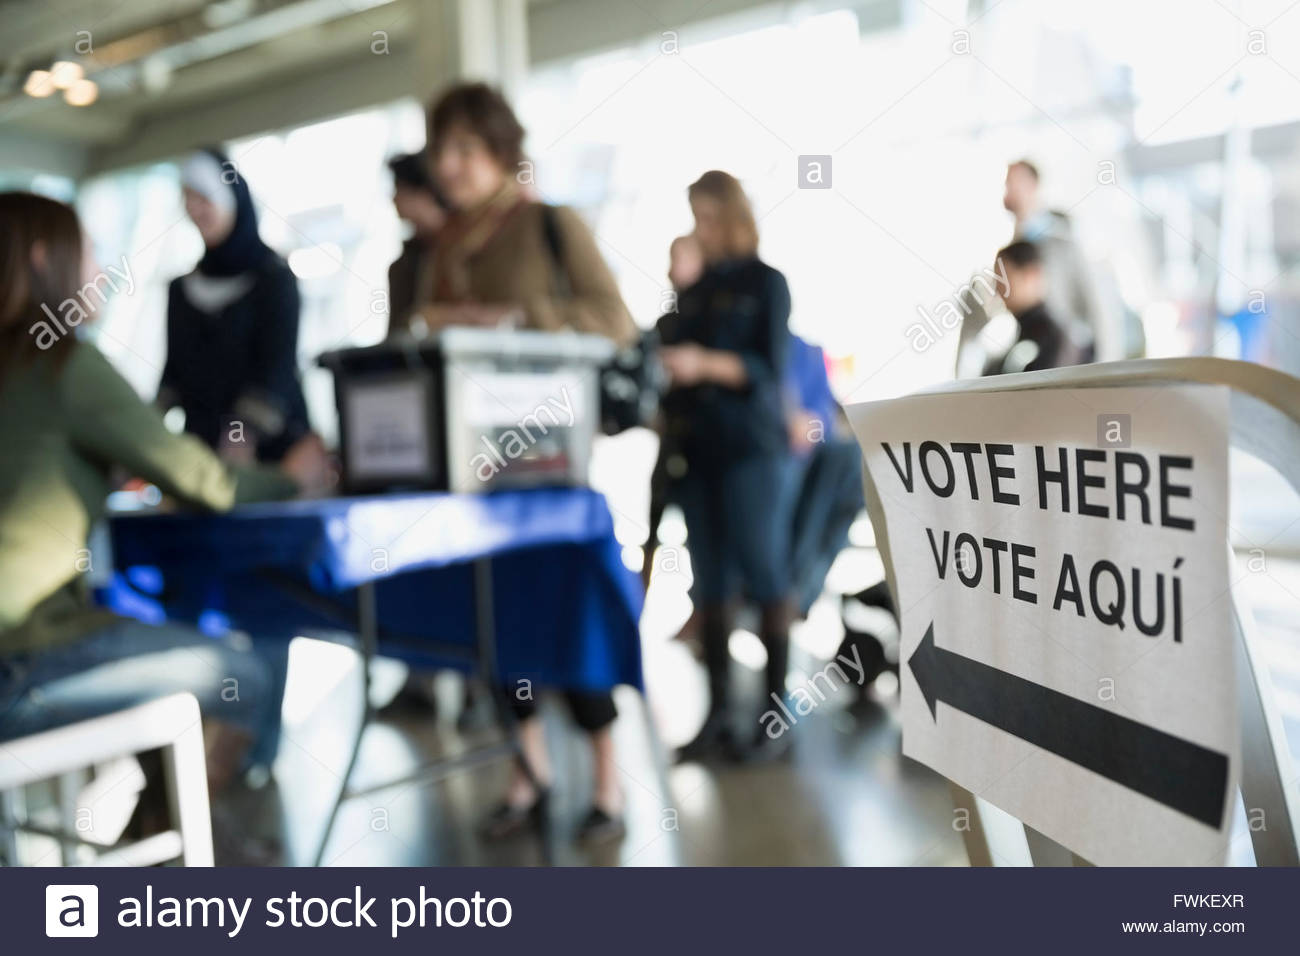 'Vote here' sign at polling place Stock Photo